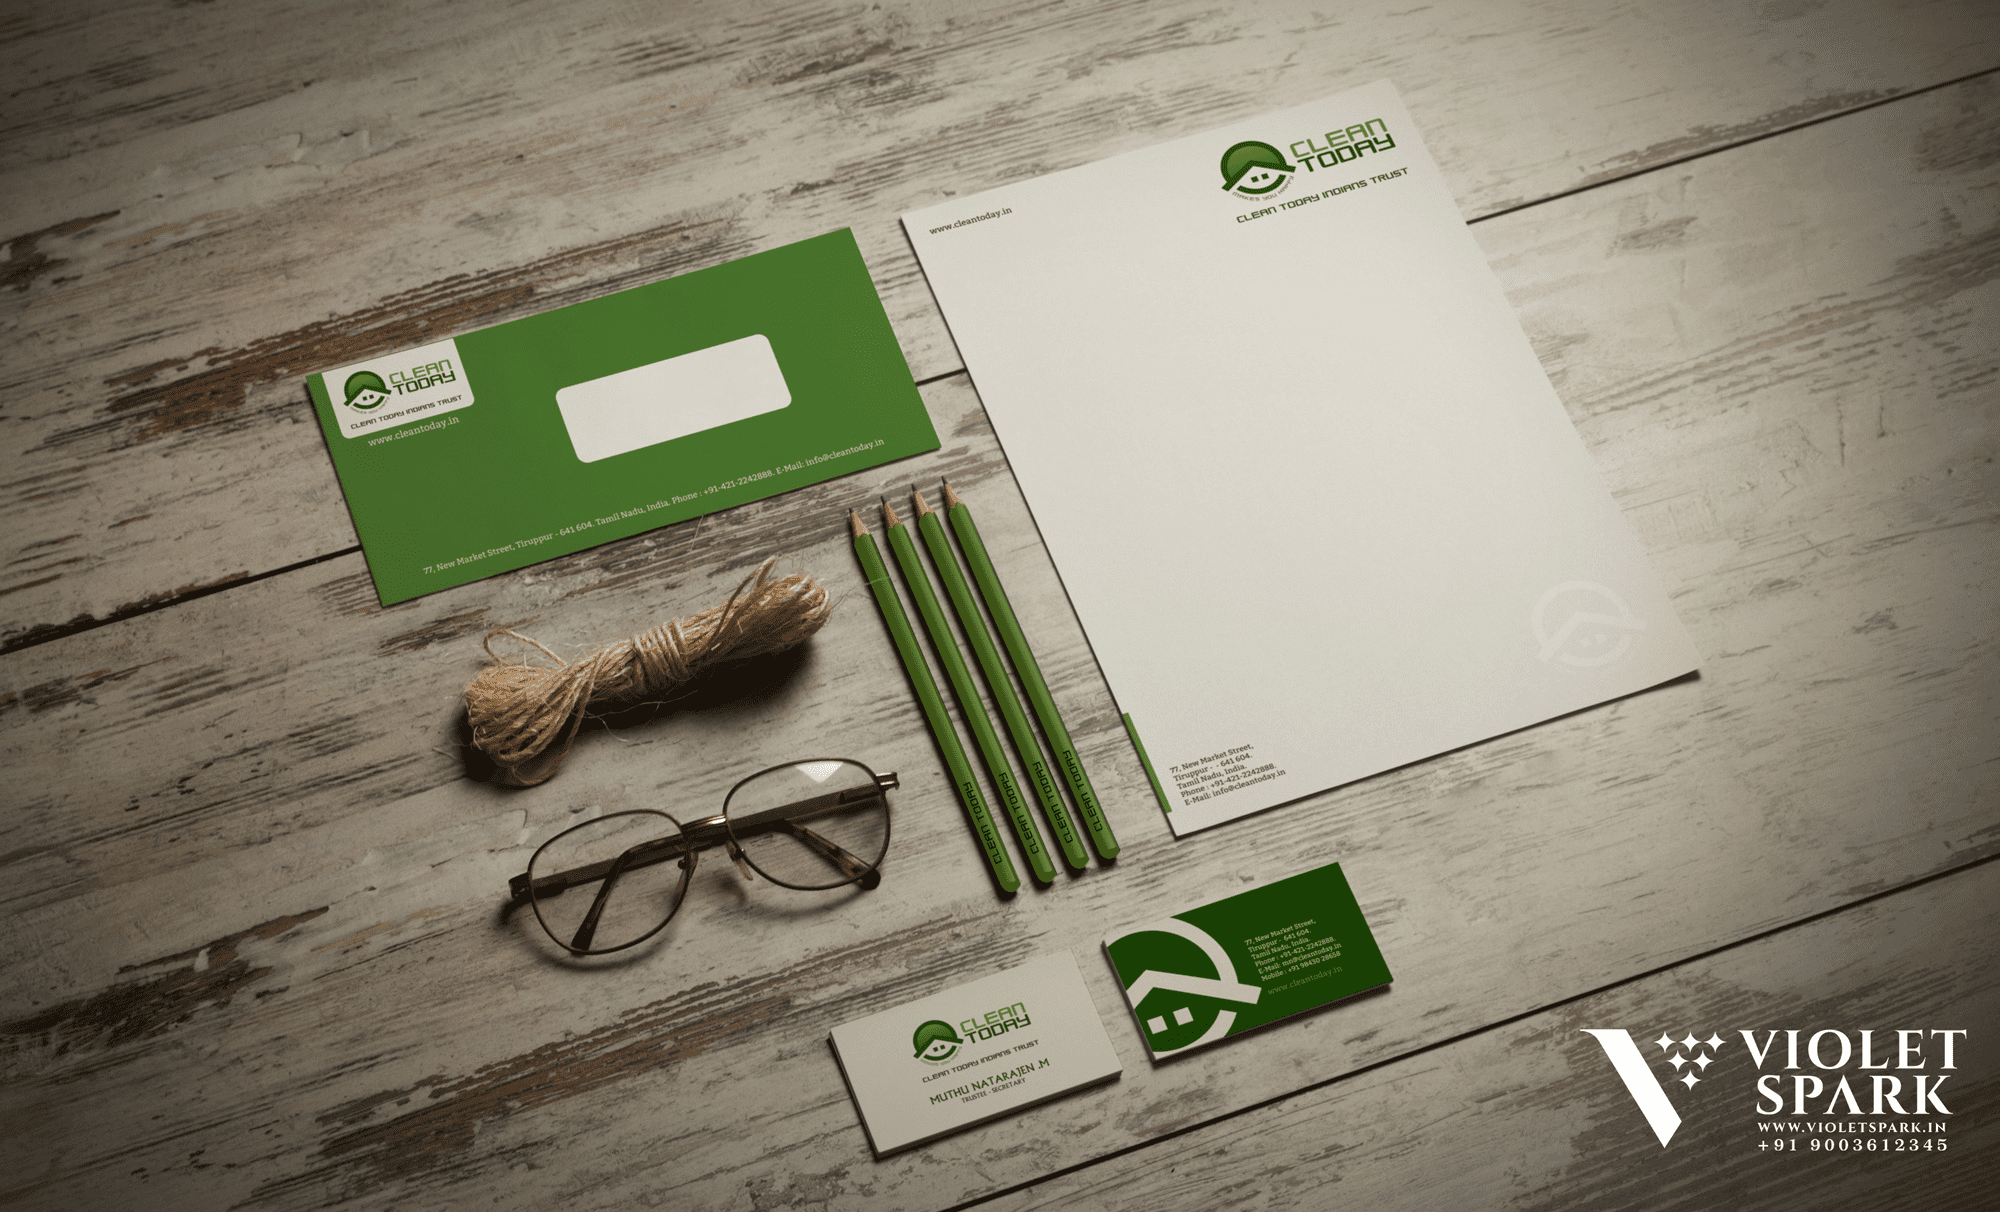 Clean Today by The Chennai Silk, Calendar Branding Packaging Design Digital Marketing in Tiruppur by Violet Spark